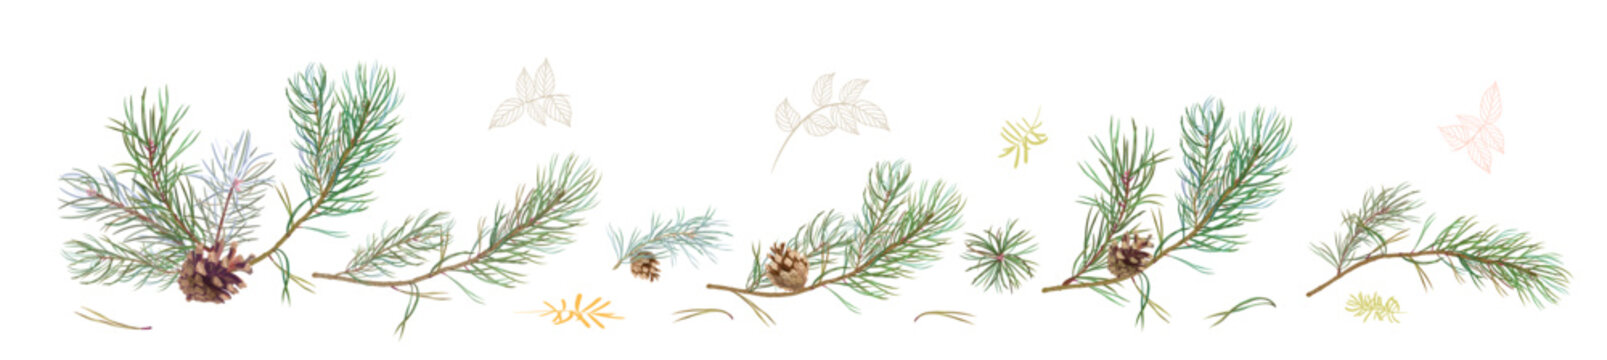 Horizontal panoramic border with pine branches and cones, needles on white background. Digital hand draw in watercolor style. Christmas tree, decorative botanical illustration for design, vector